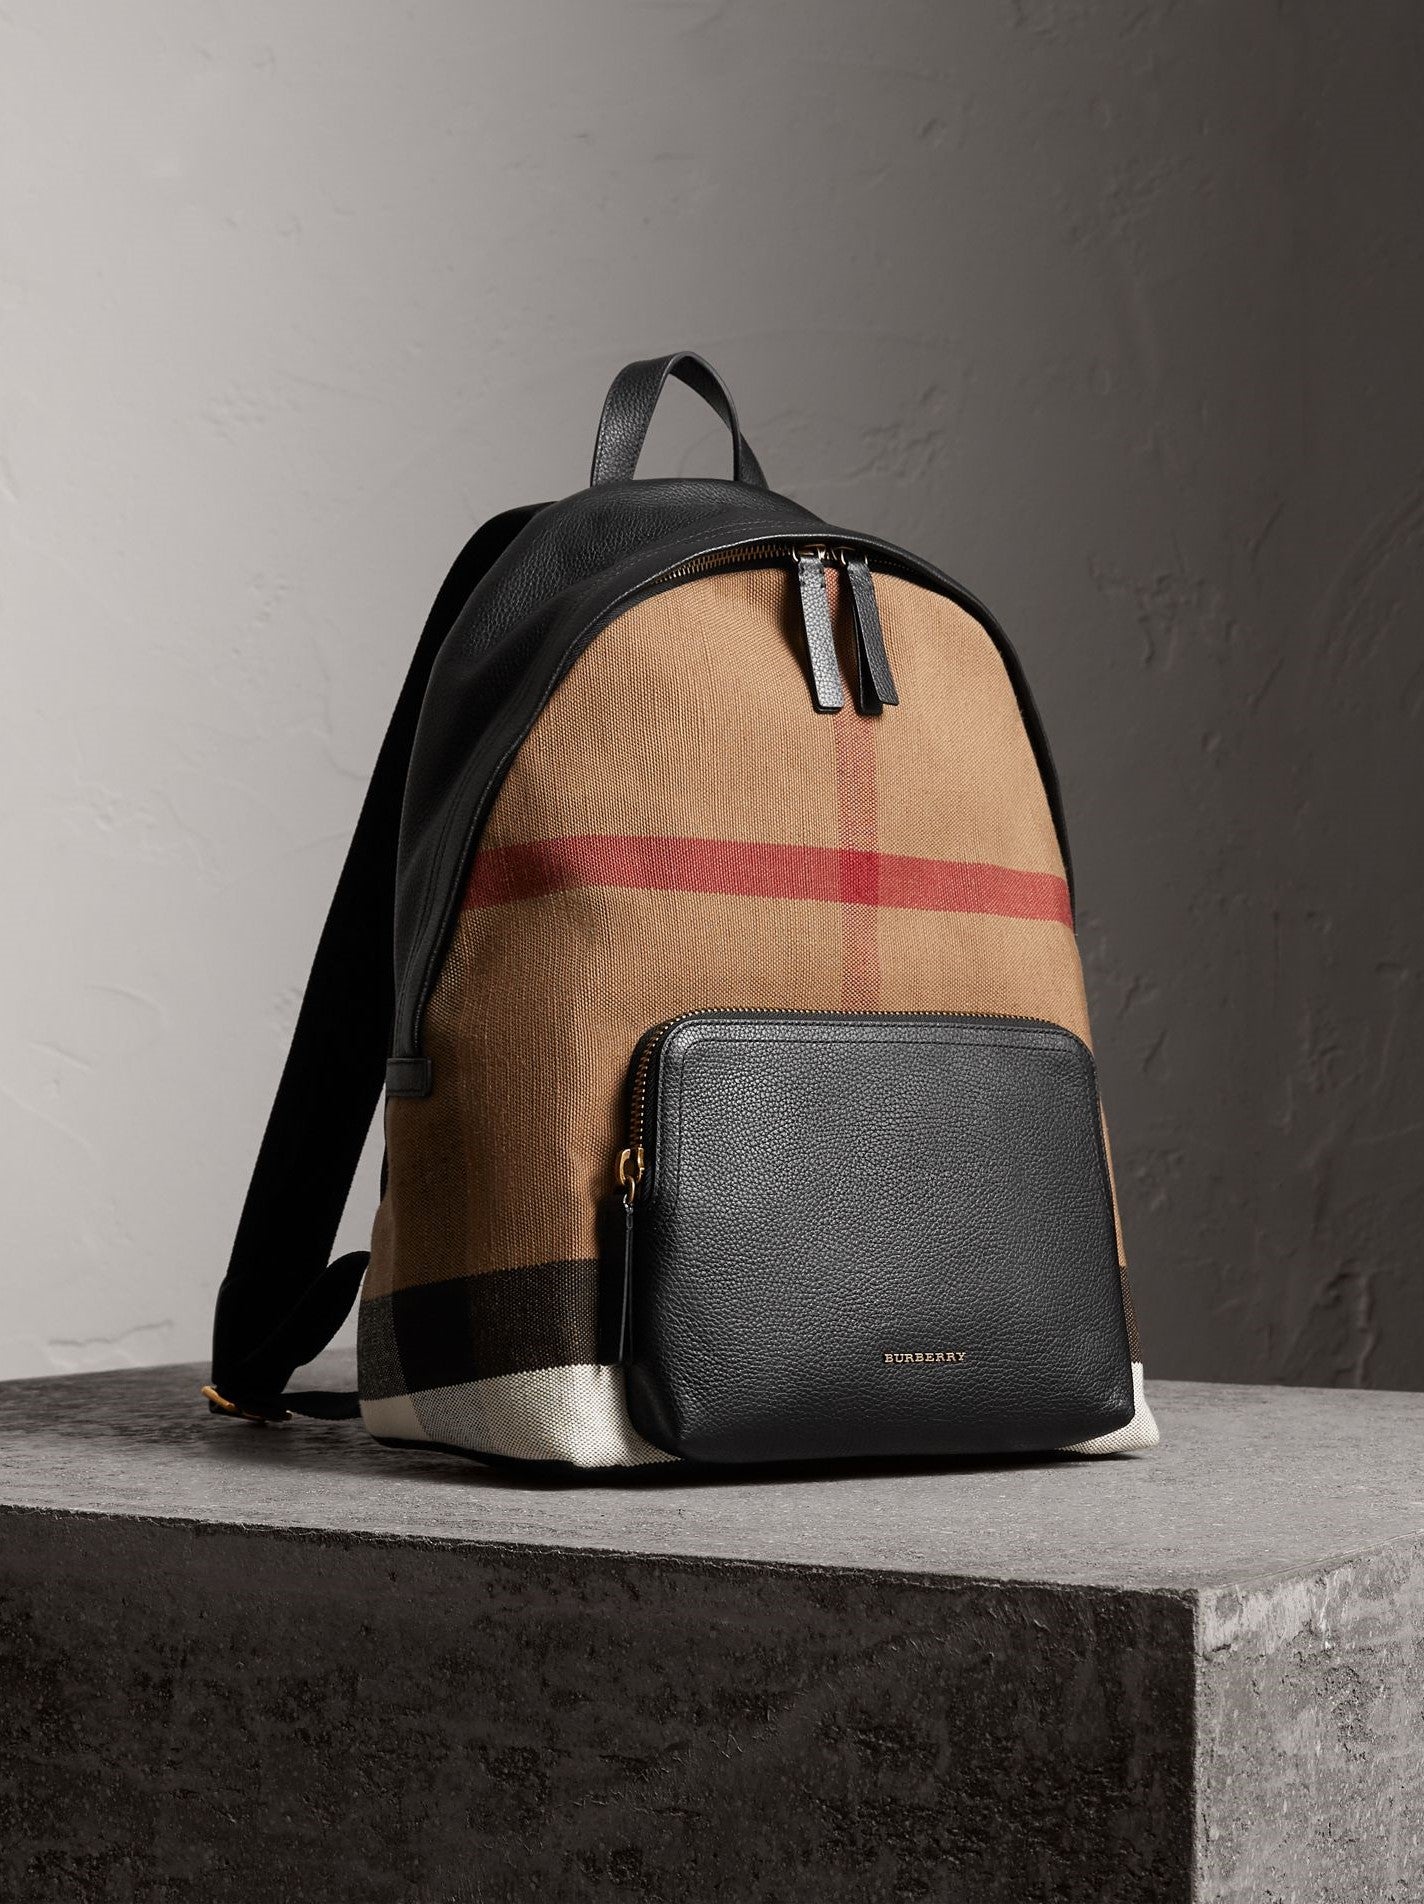 image of a burberry backpack